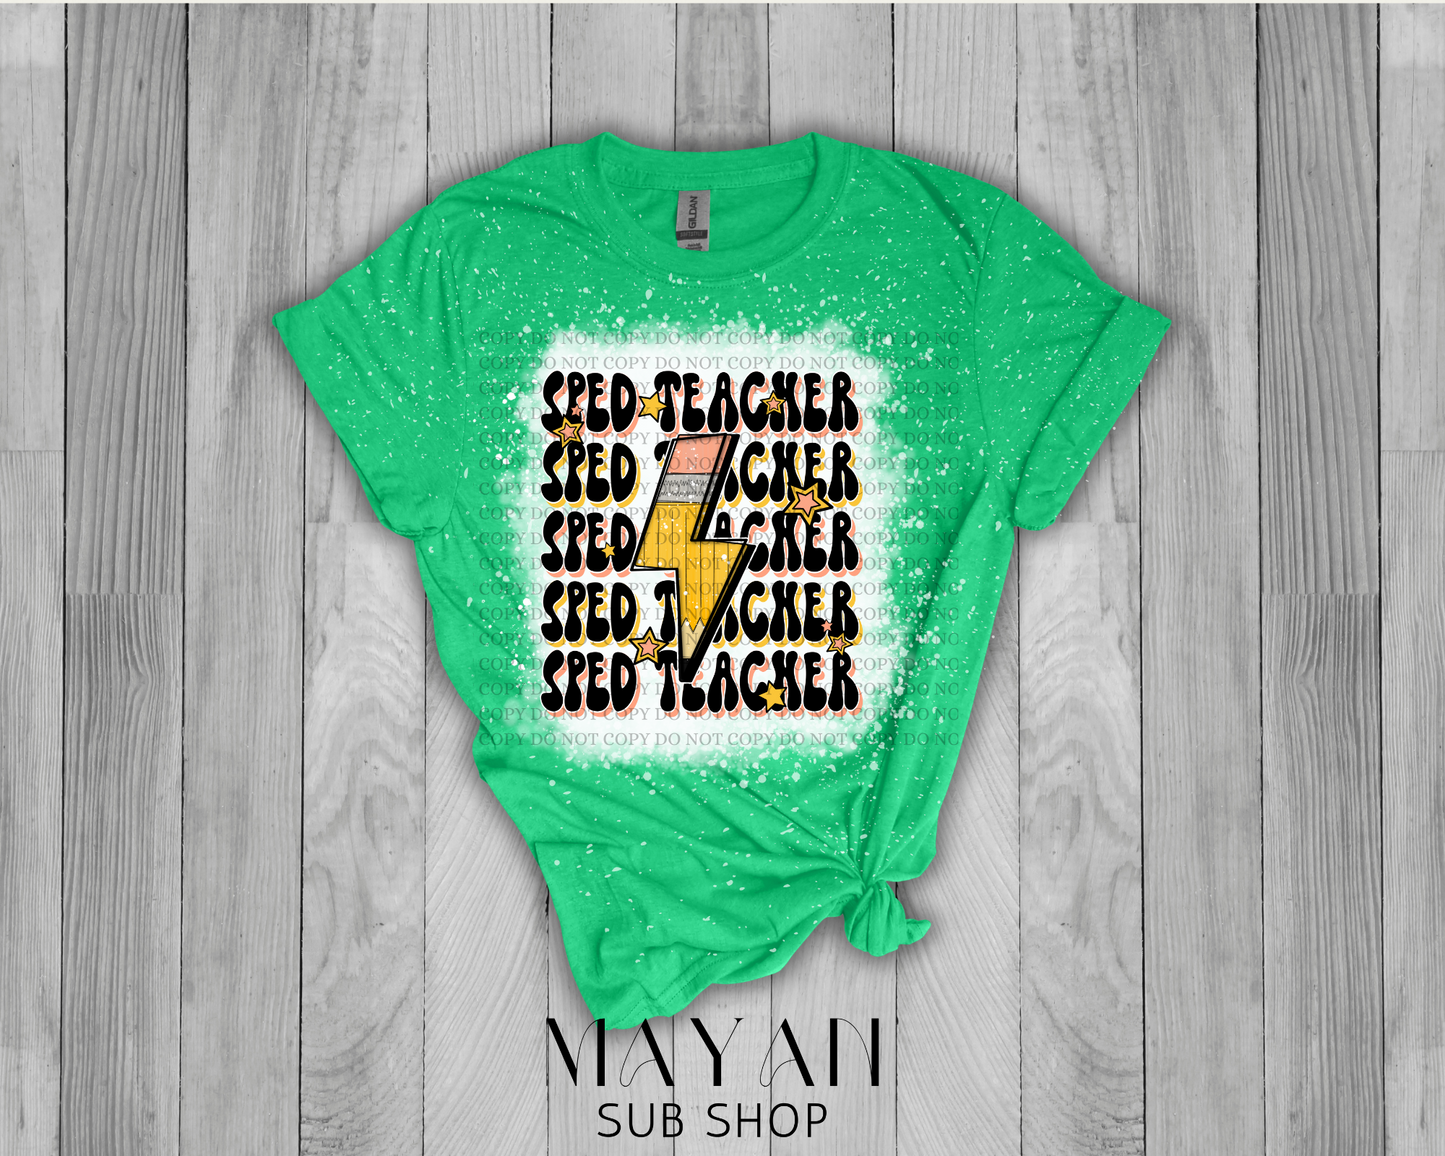 SPED-Teacher Stacked Retro Bleached Shirt - Mayan Sub Shop